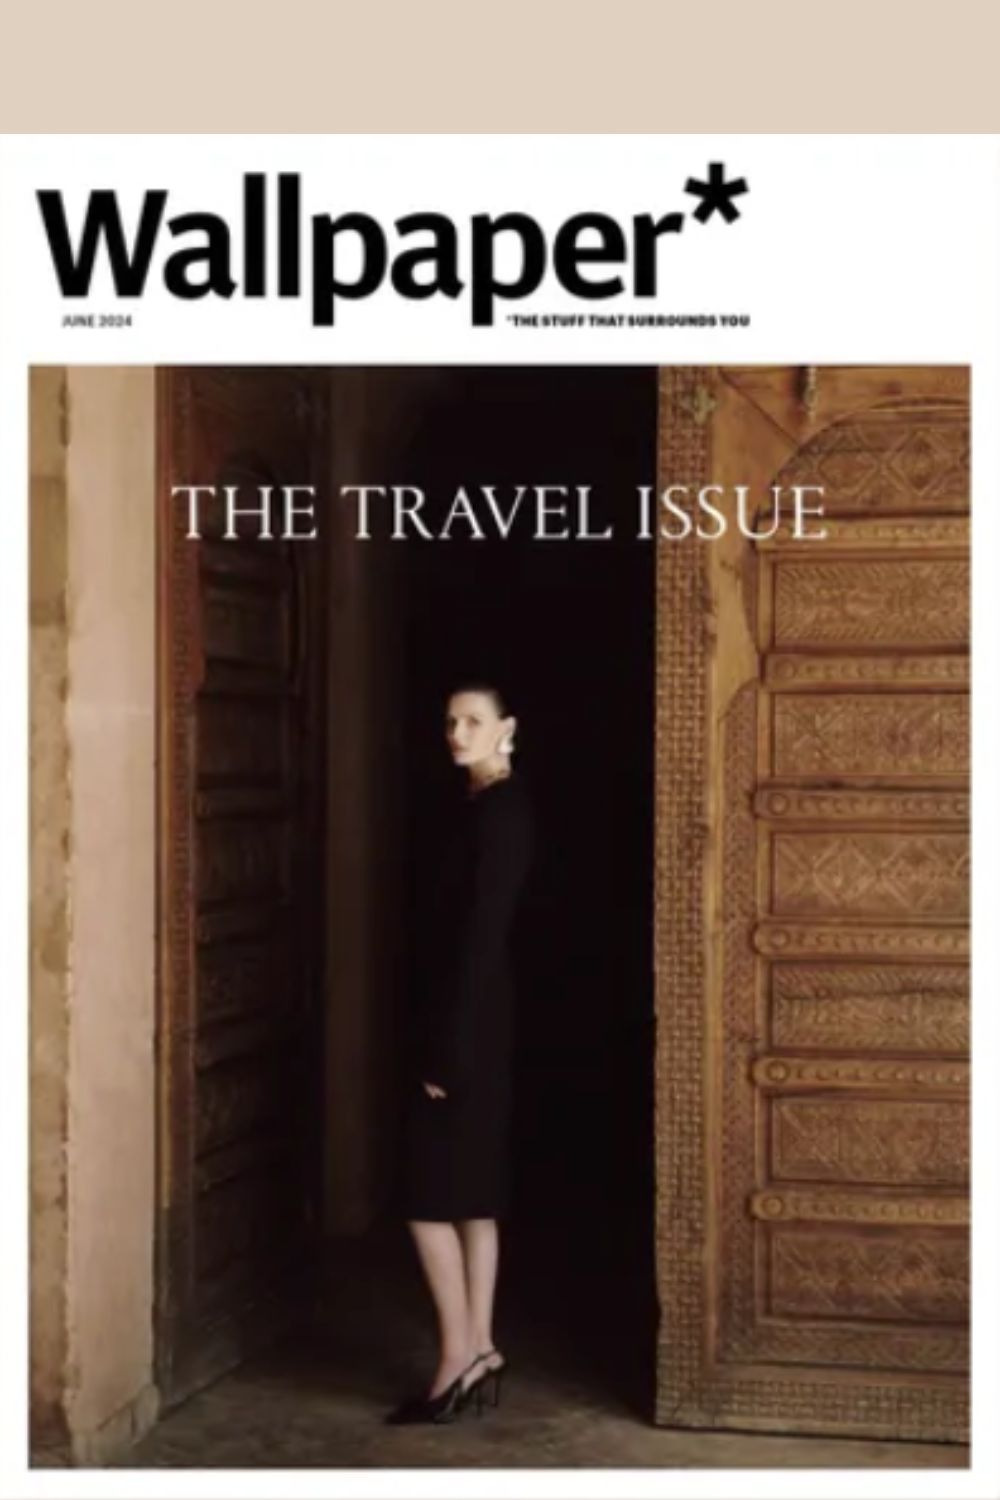 Wallpaper* Magazine cover - June 2024 "The Travel Issue"